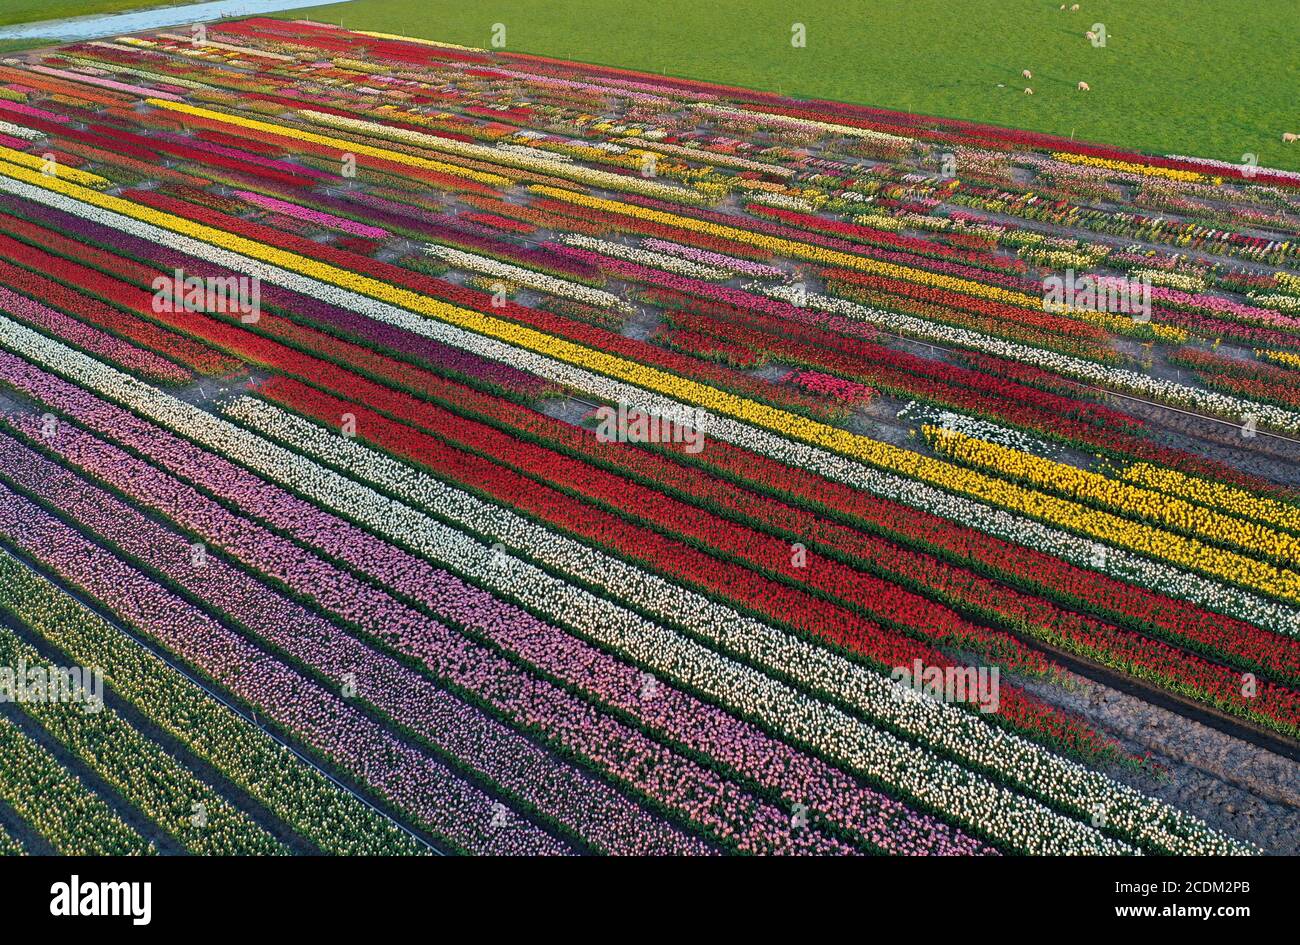 aerial view of blooming tulip fields, 26.04.2020, Netherlands, Northern Netherlands, Obdam Stock Photo